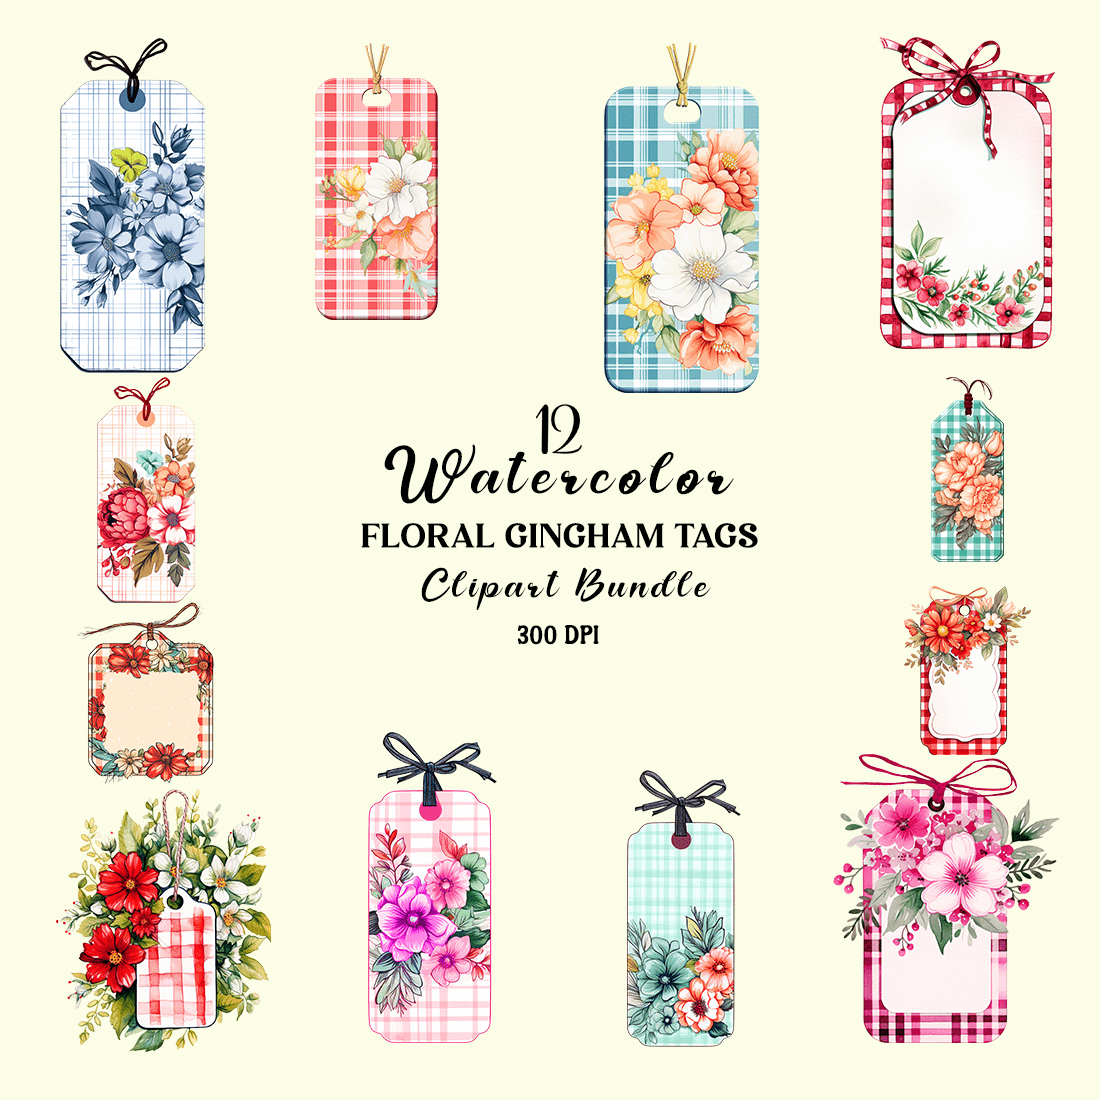 Watercolor Floral Gingham Tags Clipart Bundle cover image.